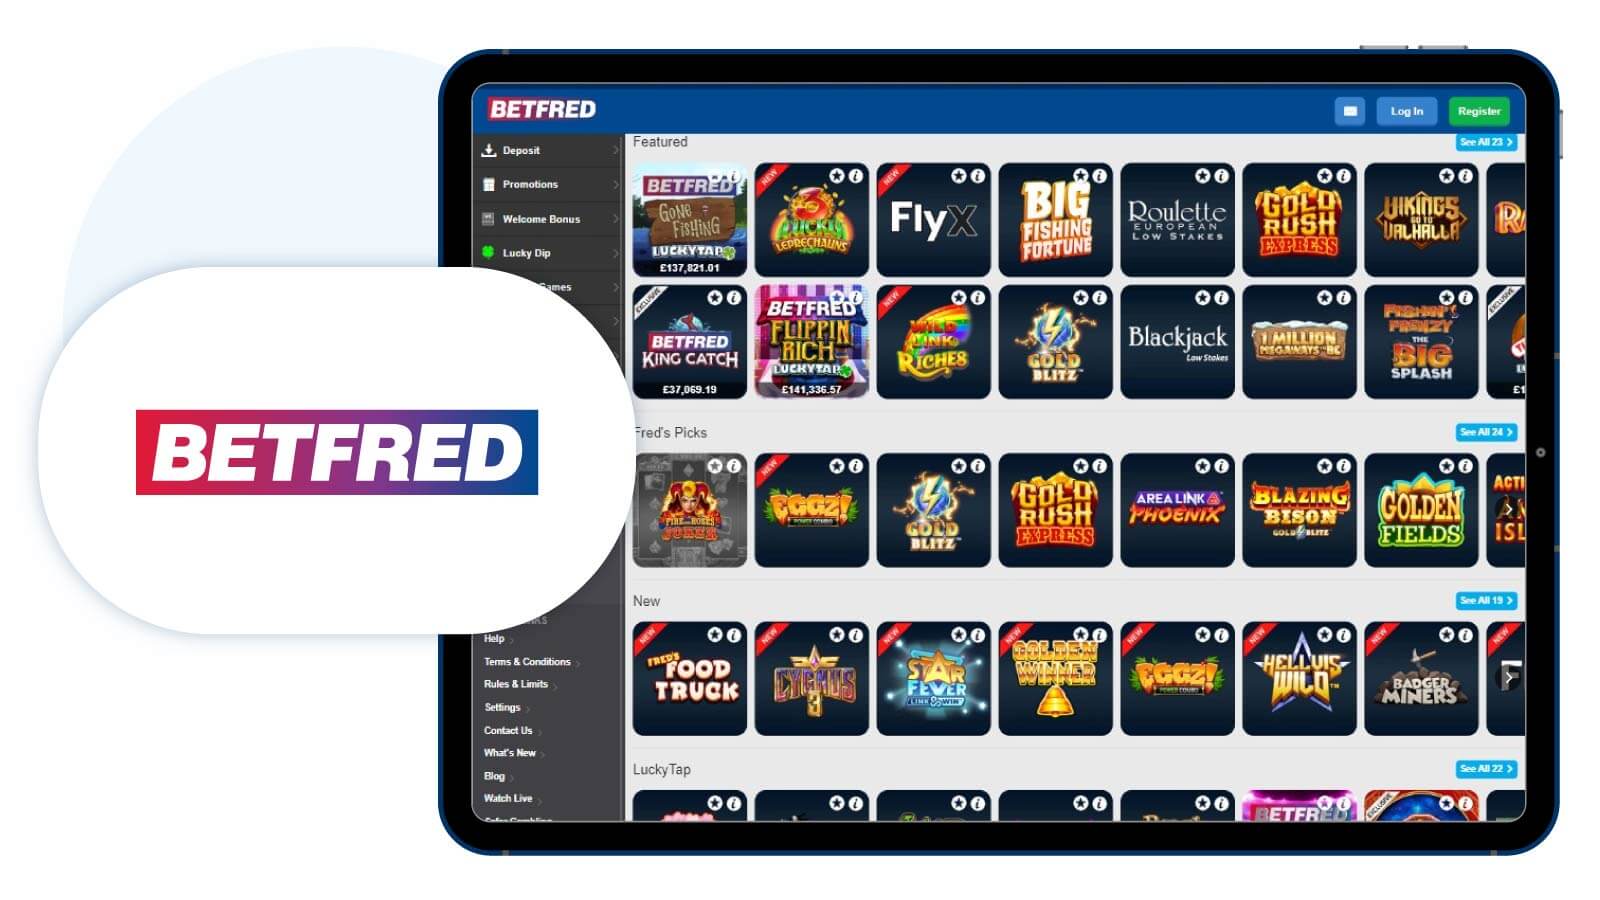 Betfred - best slots welcome bonus with low wagering